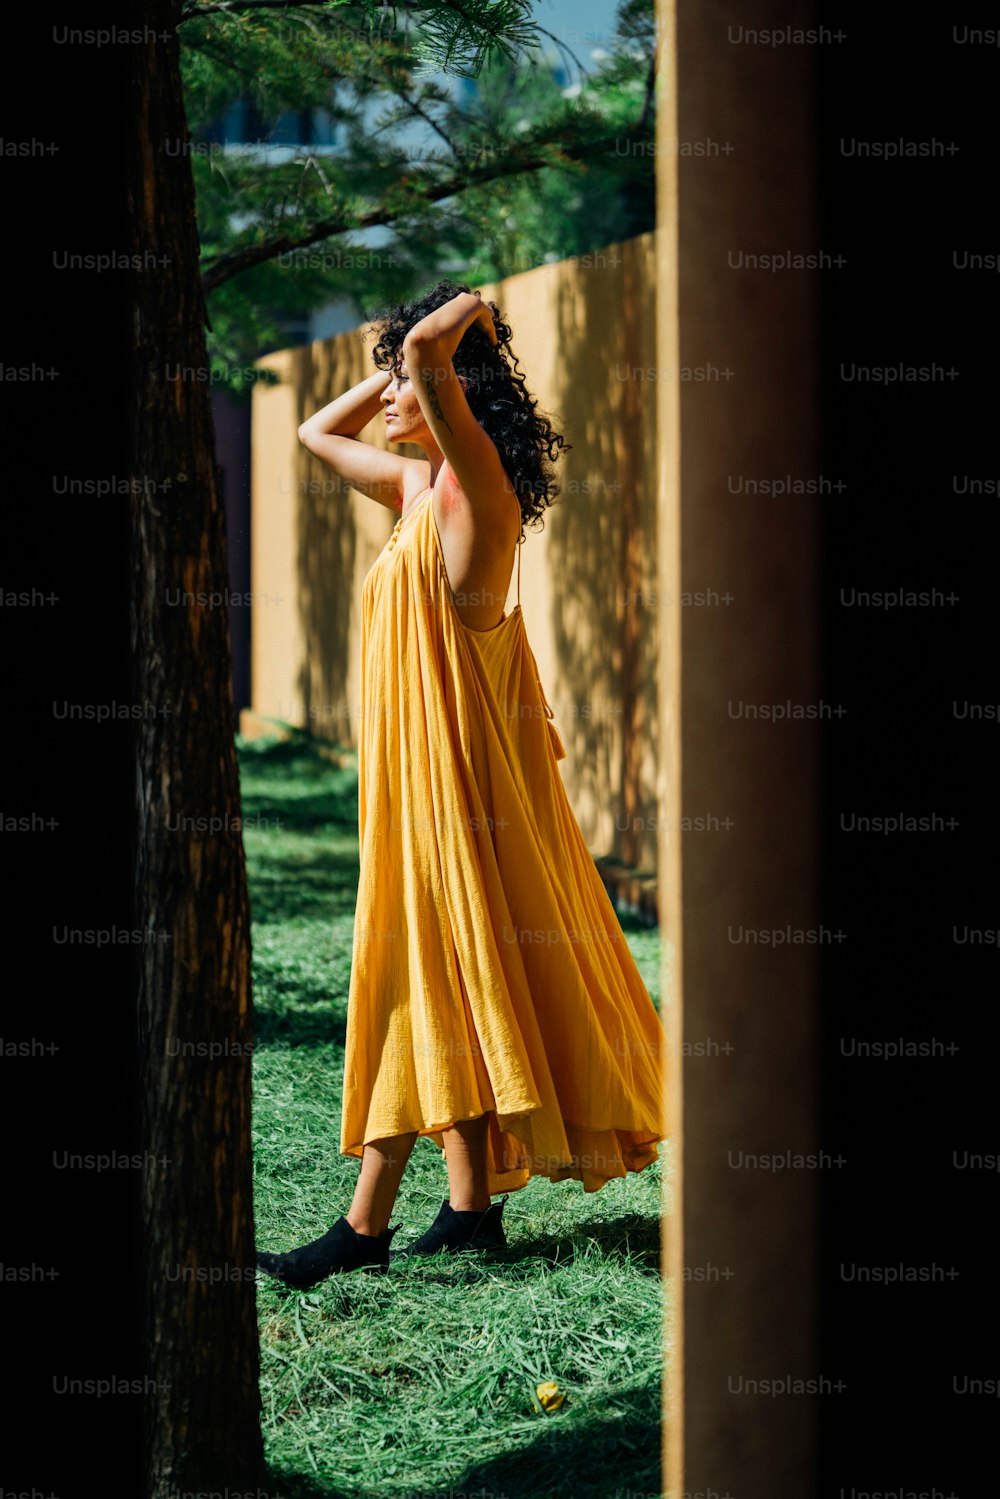 a woman in a yellow dress standing in the grass